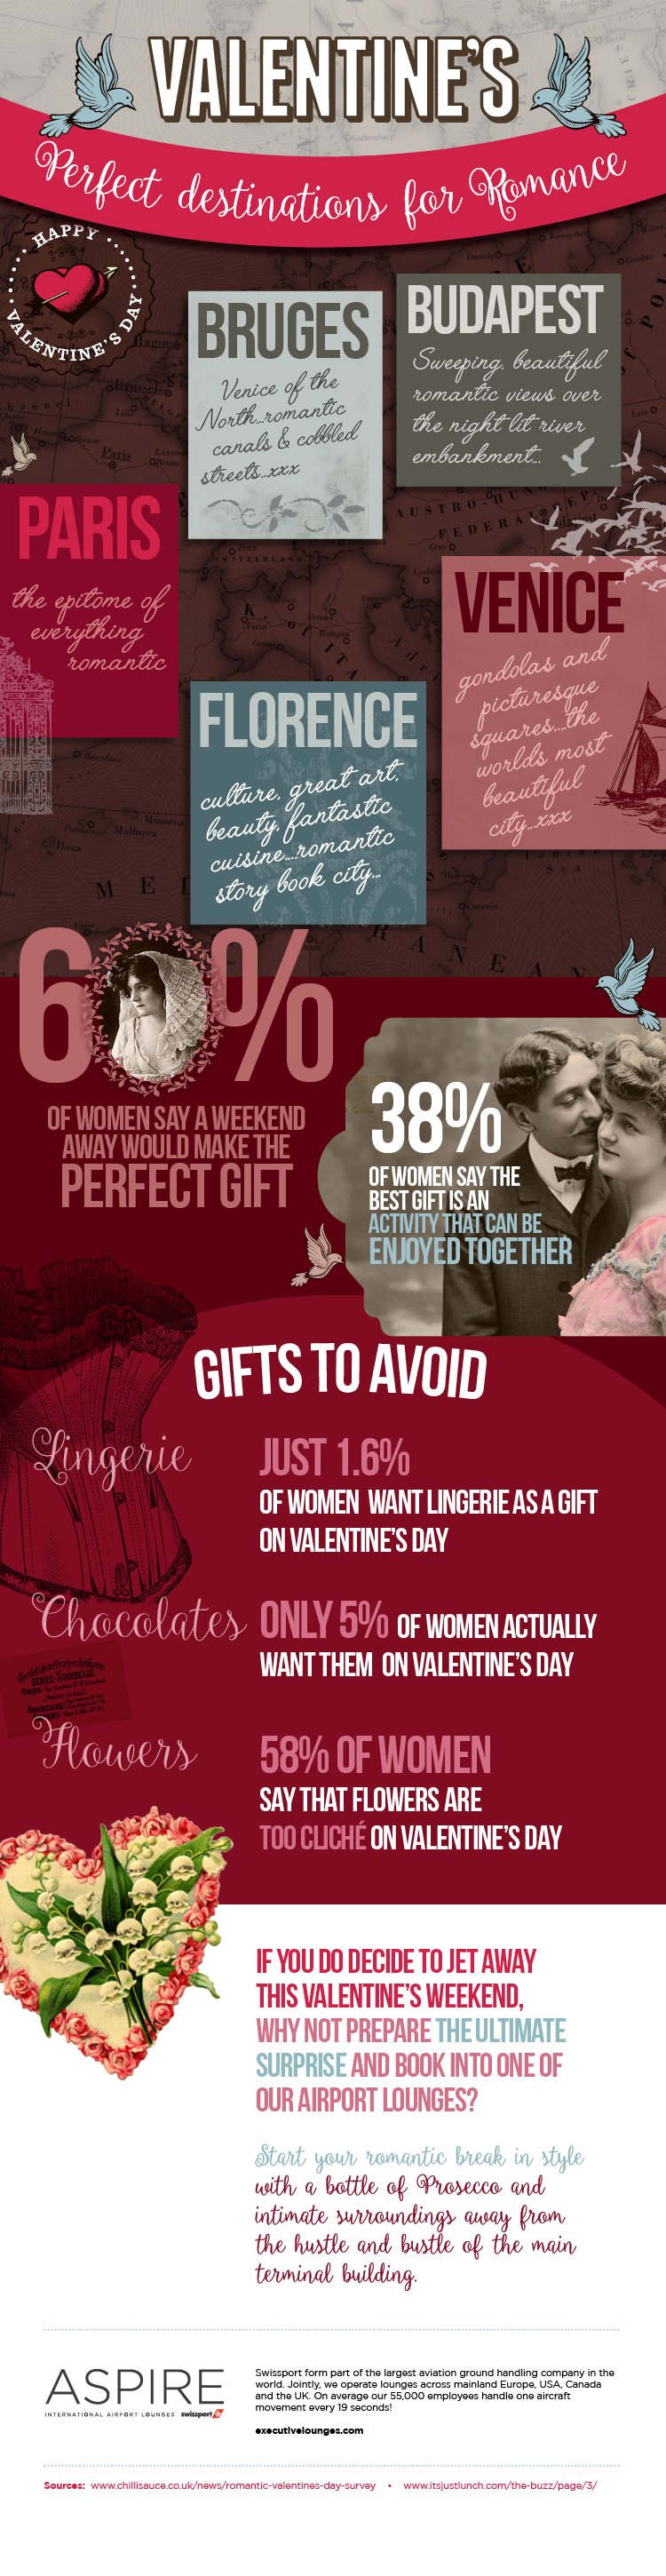 Valentines - Perfect Destinations for Romance Infographic